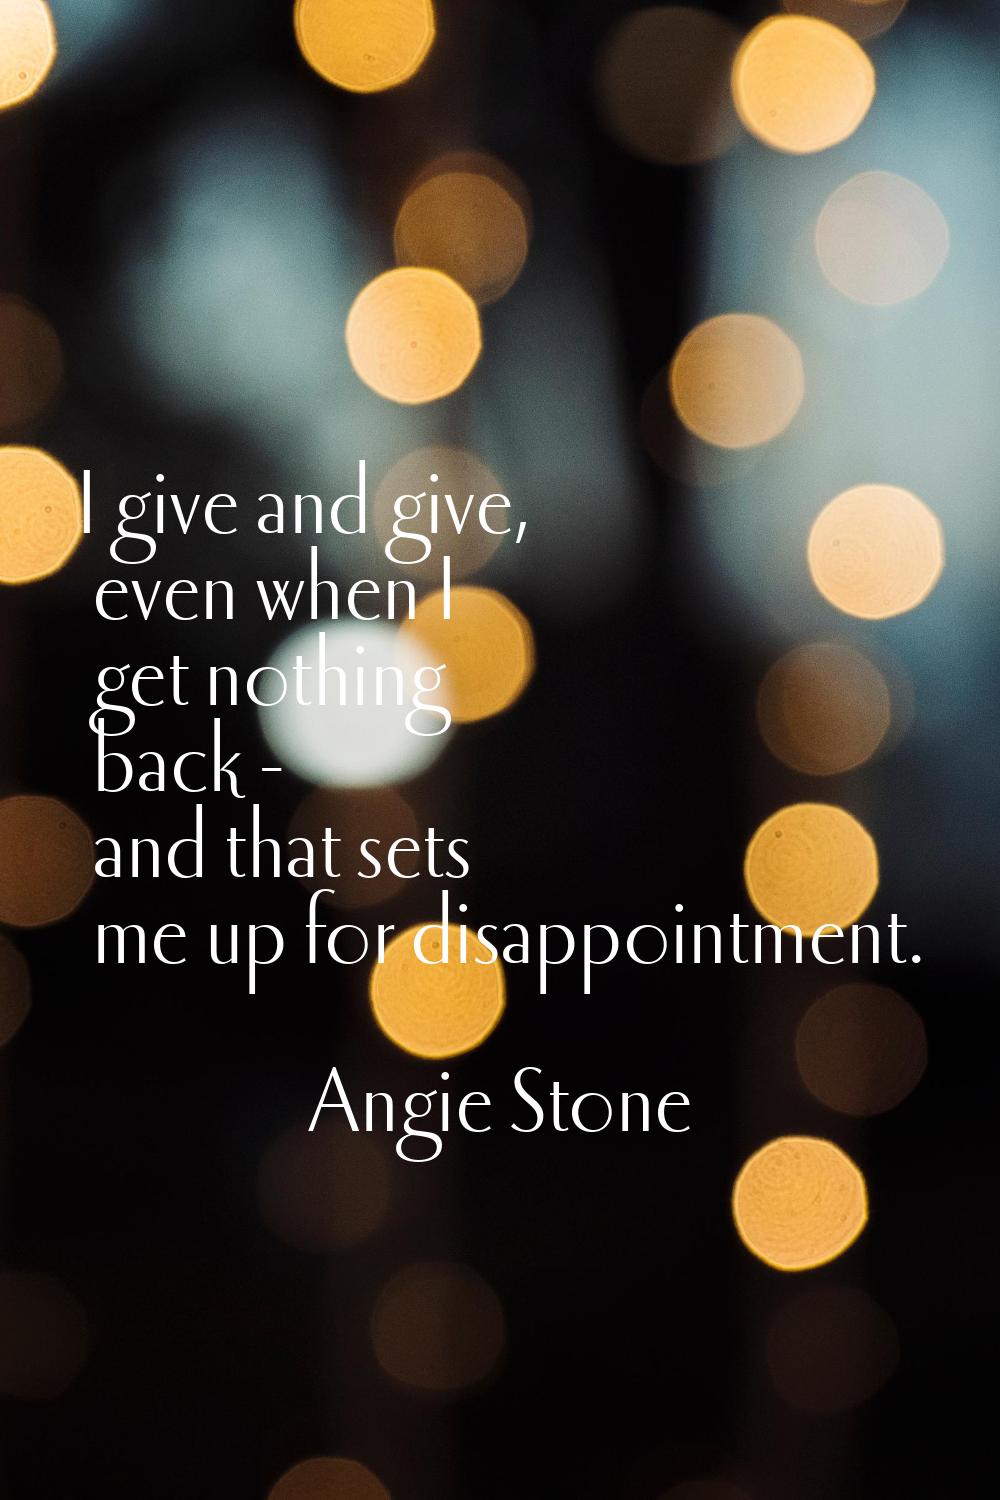 I give and give, even when I get nothing back - and that sets me up for disappointment.